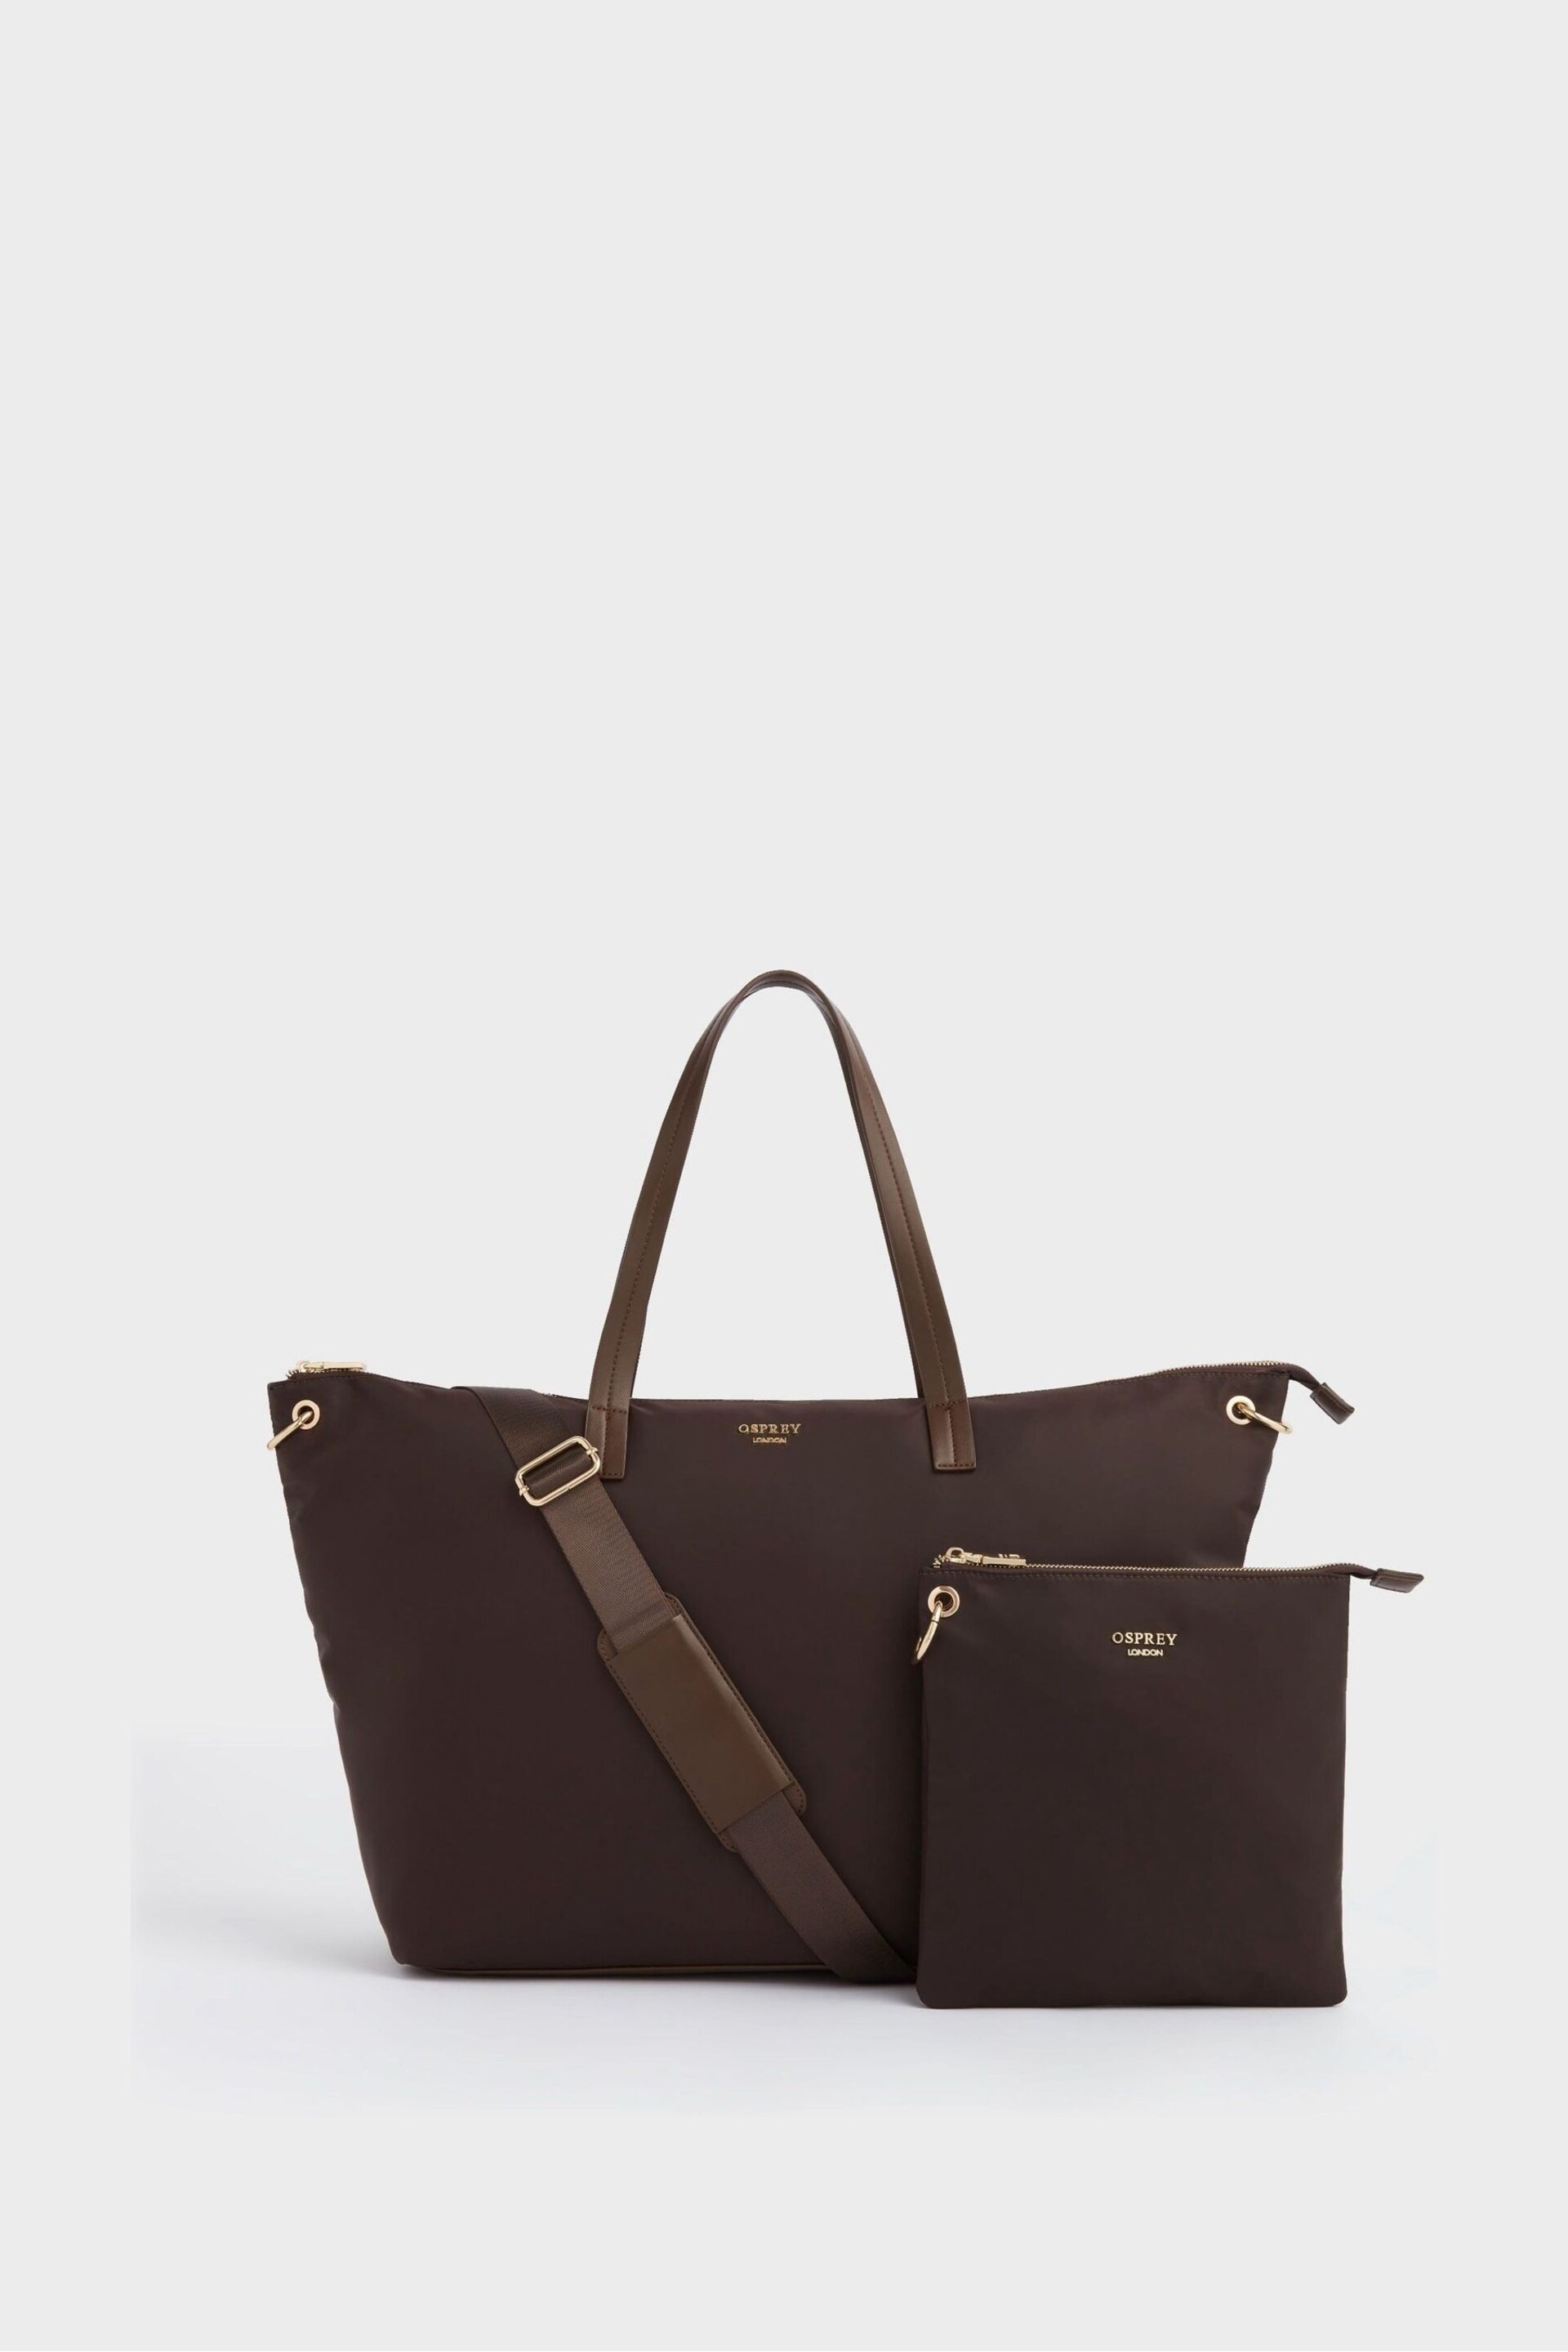 Osprey London The Wanderer Nylon Weekender Purse With Pouch - Image 1 of 6